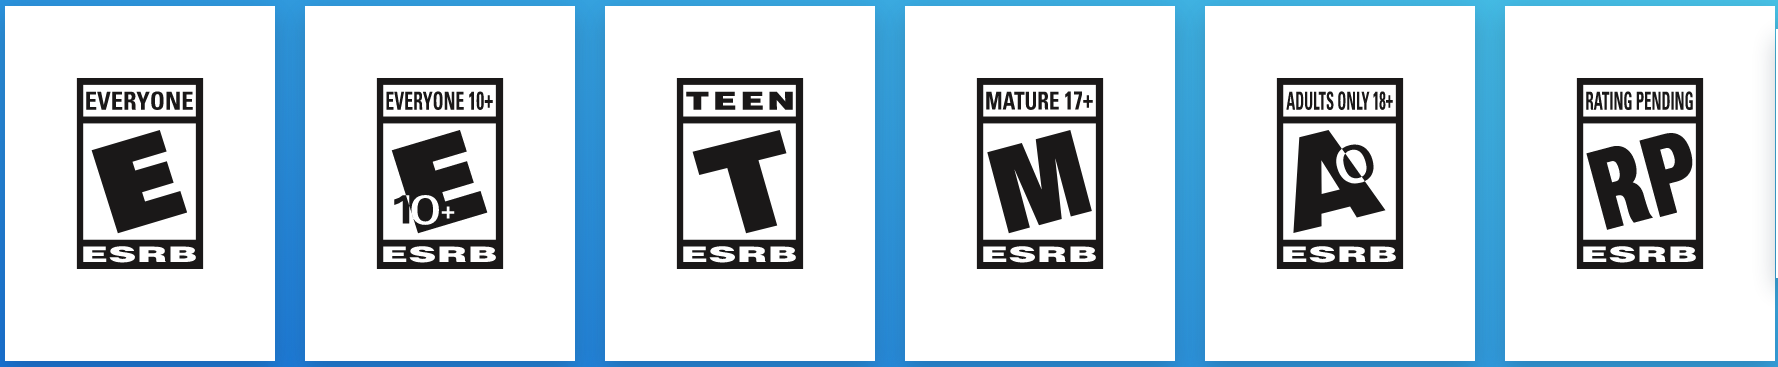 rated m games on switch